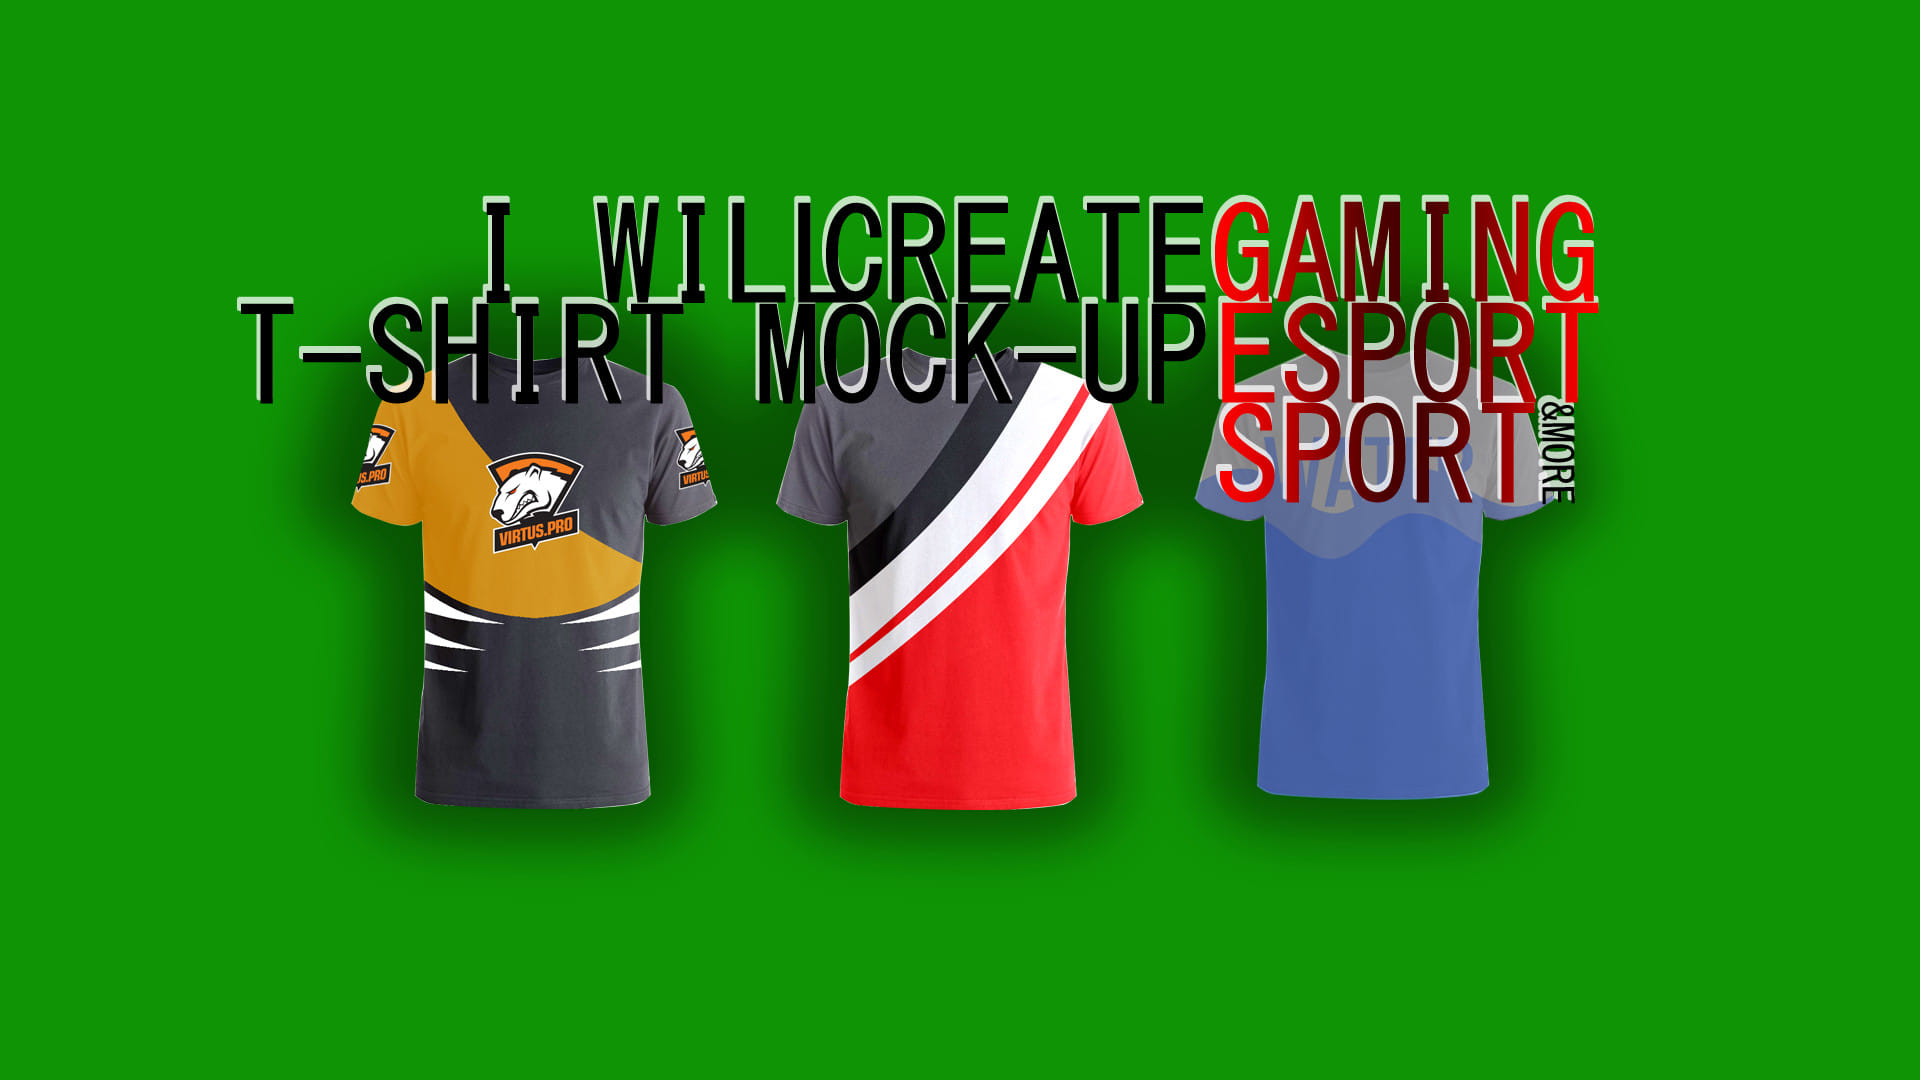 Download Create Gaming Esport Sport Tshirt Mockup By Cemodesign Fiverr